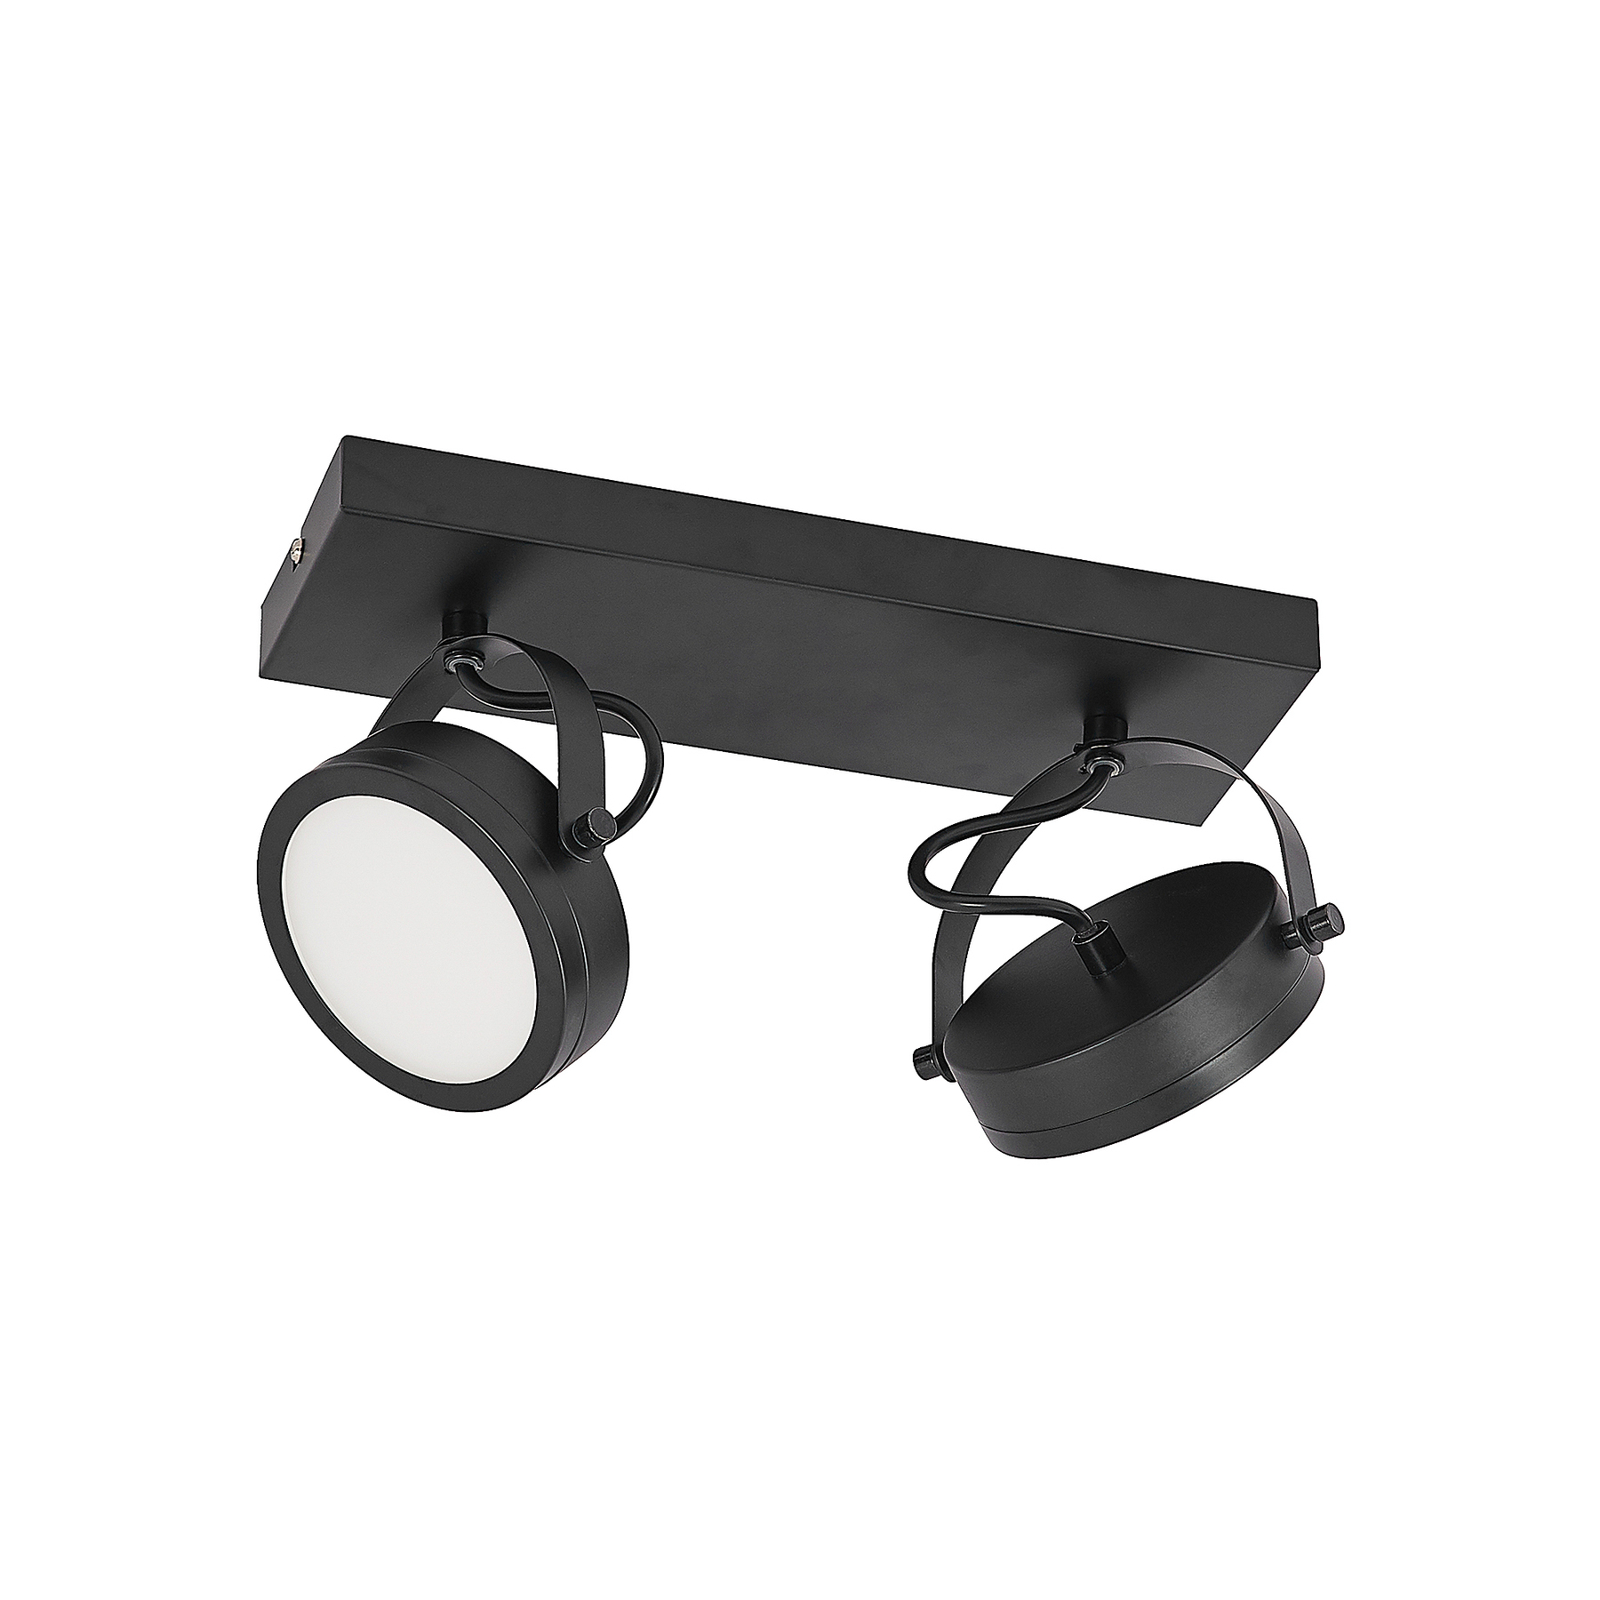 Lindby Omila spot sufitowy LED, 2-punktowy